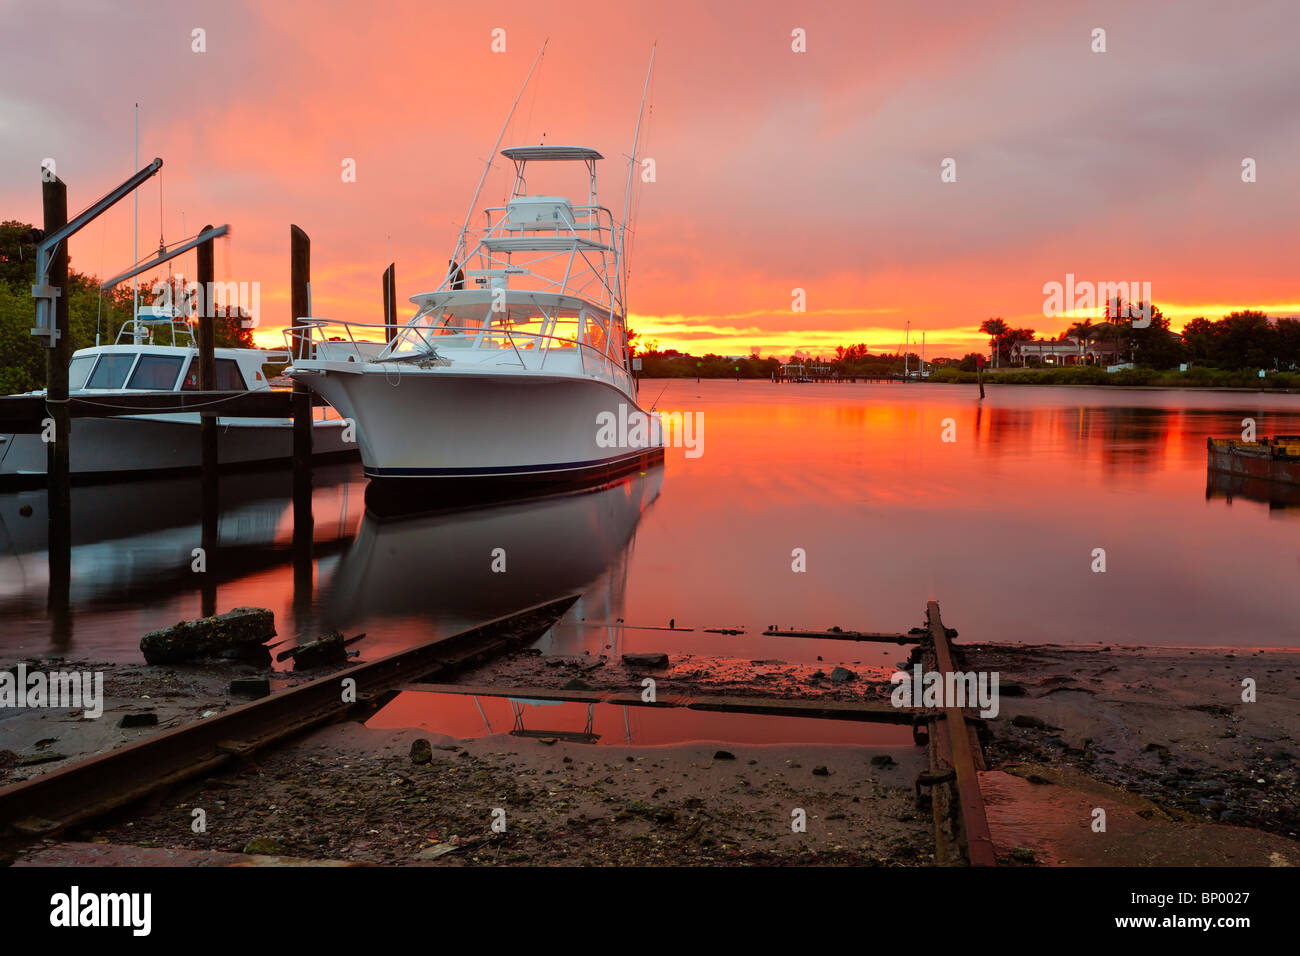 Private and commercial fishing boat at sunset at Tarpon Springs, Florida Stock Photo